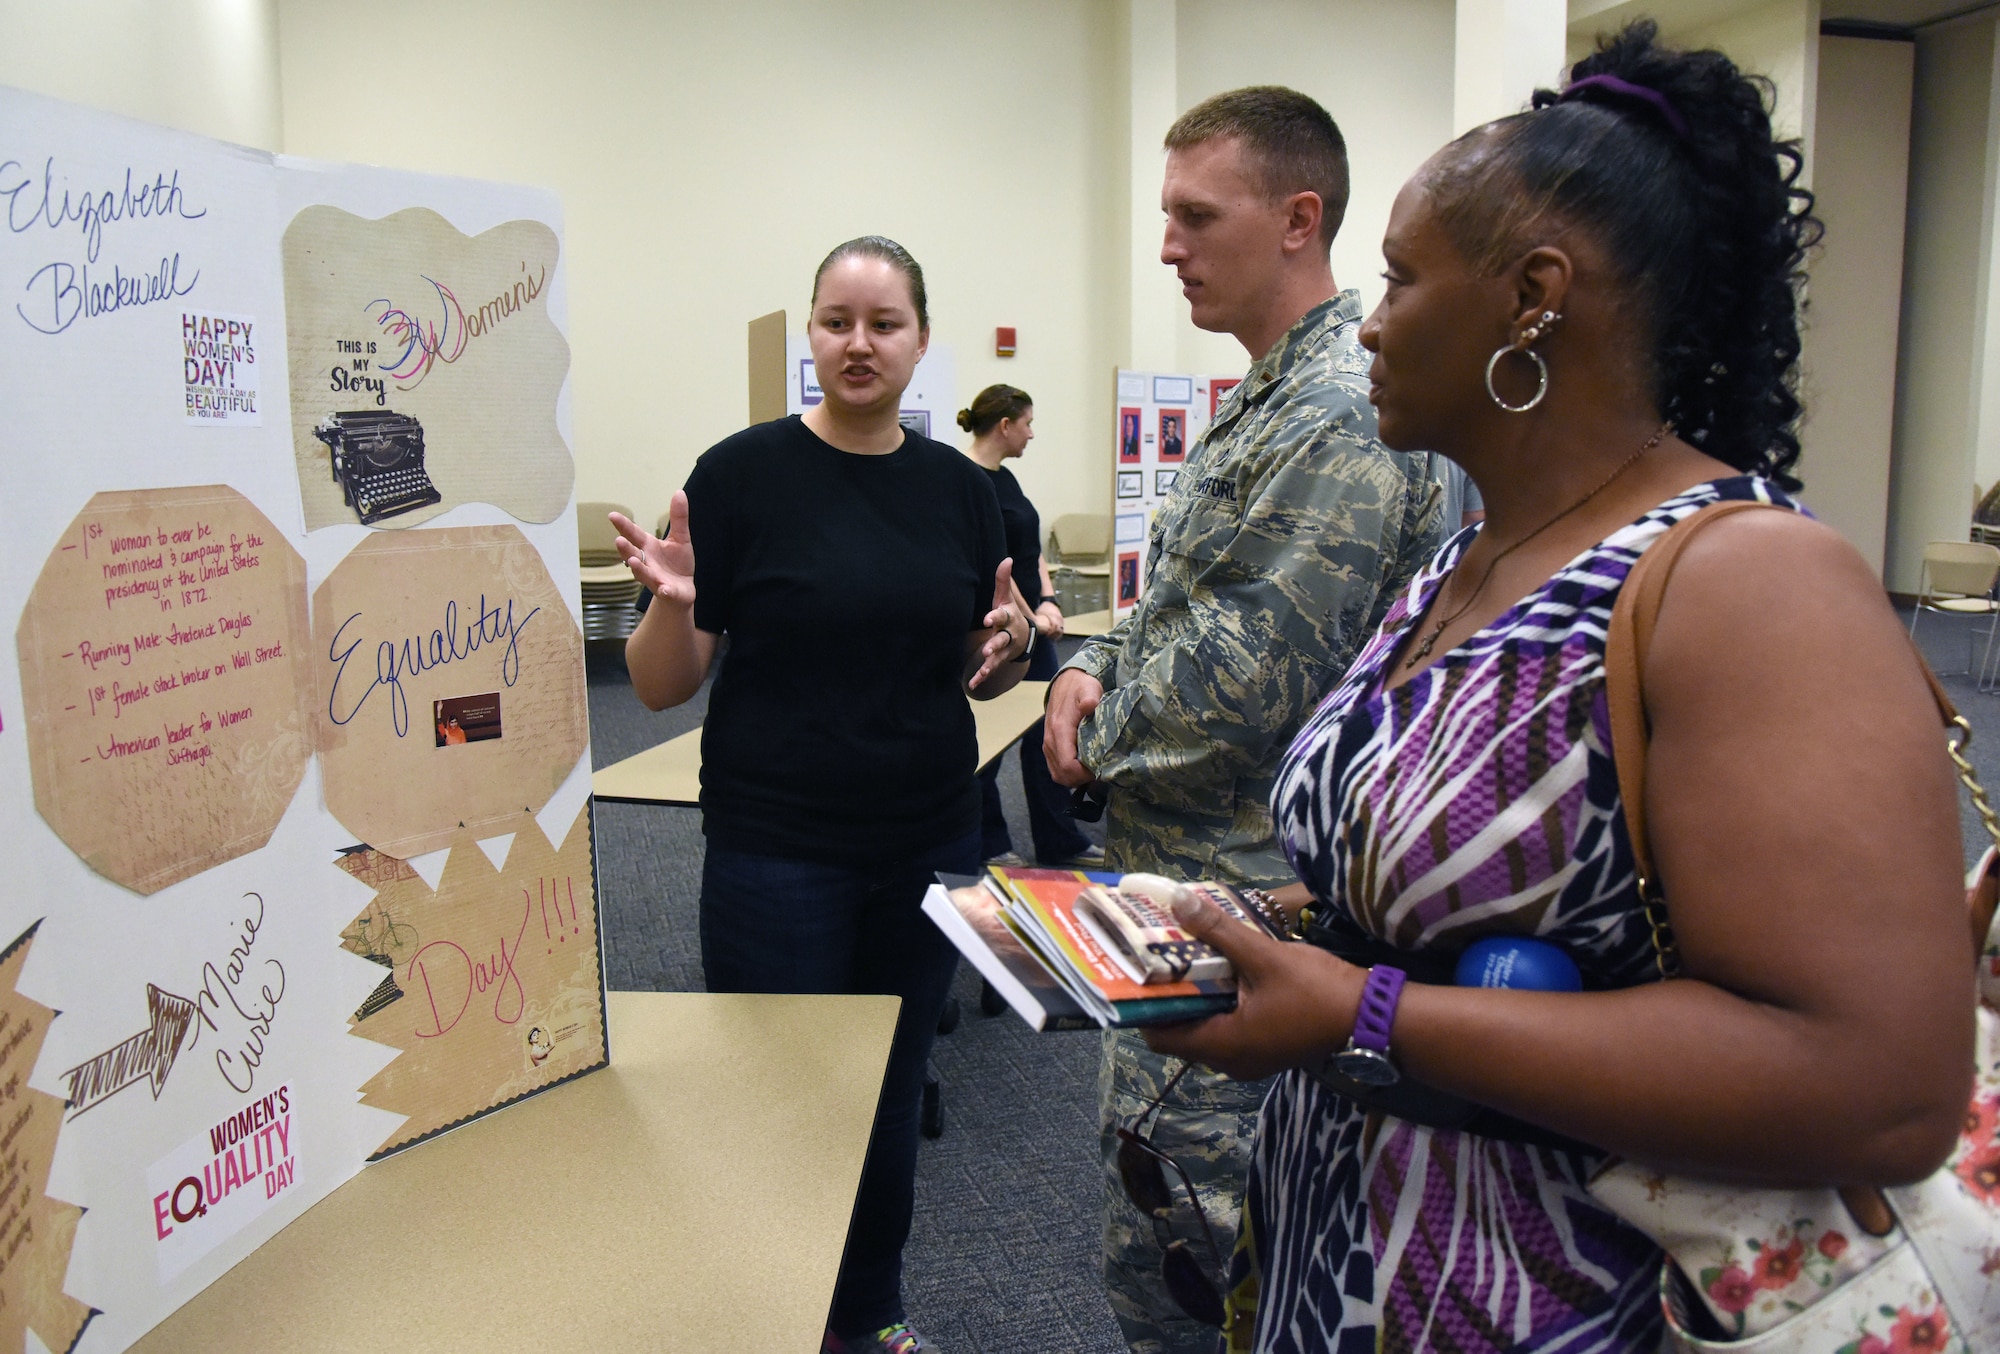 U.S. Air Force Senior Airman Savannah Slaughter, 81st Comptroller Squadron financial analyst, briefs 2nd Lt. Bryan Case, 81st CPTS deputy flight commander, and Janice Carr-Scott, 81st CPTS accounting technician, on educational panels during the 81st Training Wing Women's Equality Day Observance at the Roberts Consolidated Aircraft Maintenance Facility at Keesler Air Force Base, Mississippi, Aug. 21, 2018. In 1971, the U.S. Congress designated Aug. 26 as Women�s Equality Day. (U.S. Air Force photo by Kemberly Groue)